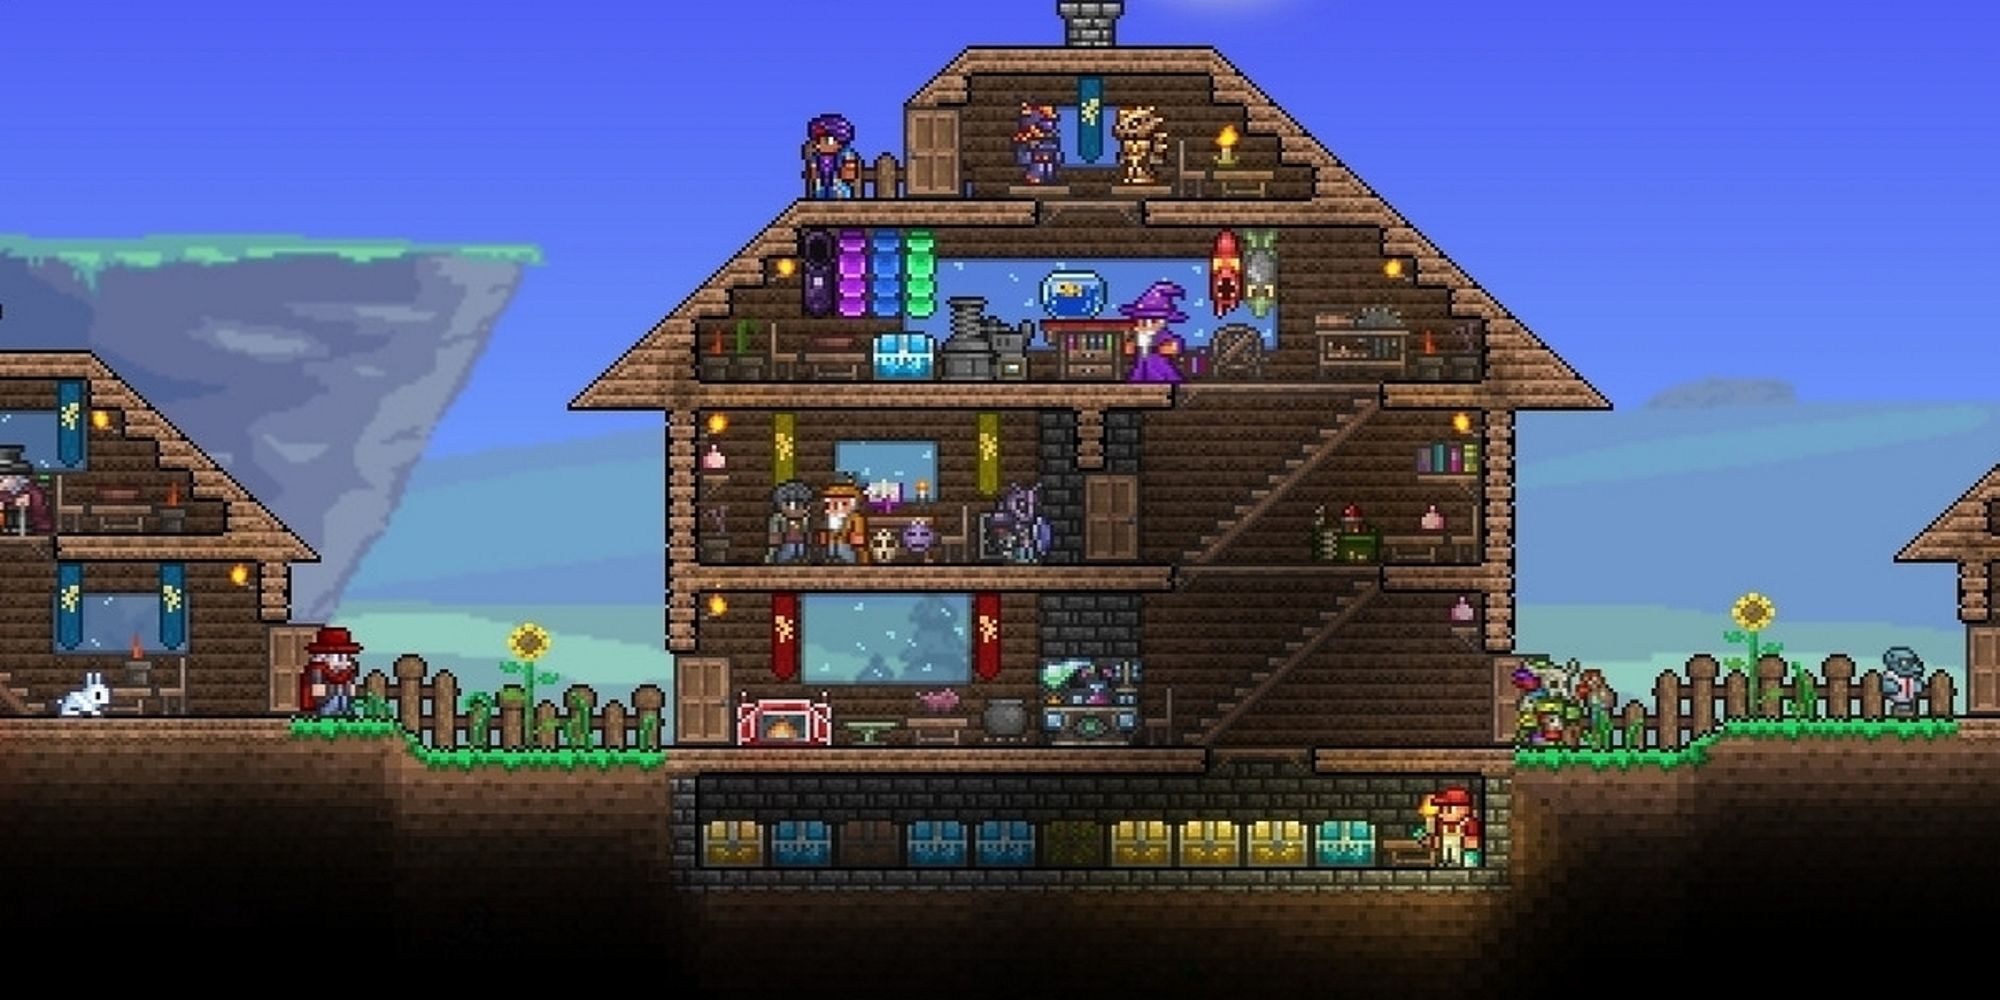 A house full of residents in Terraria